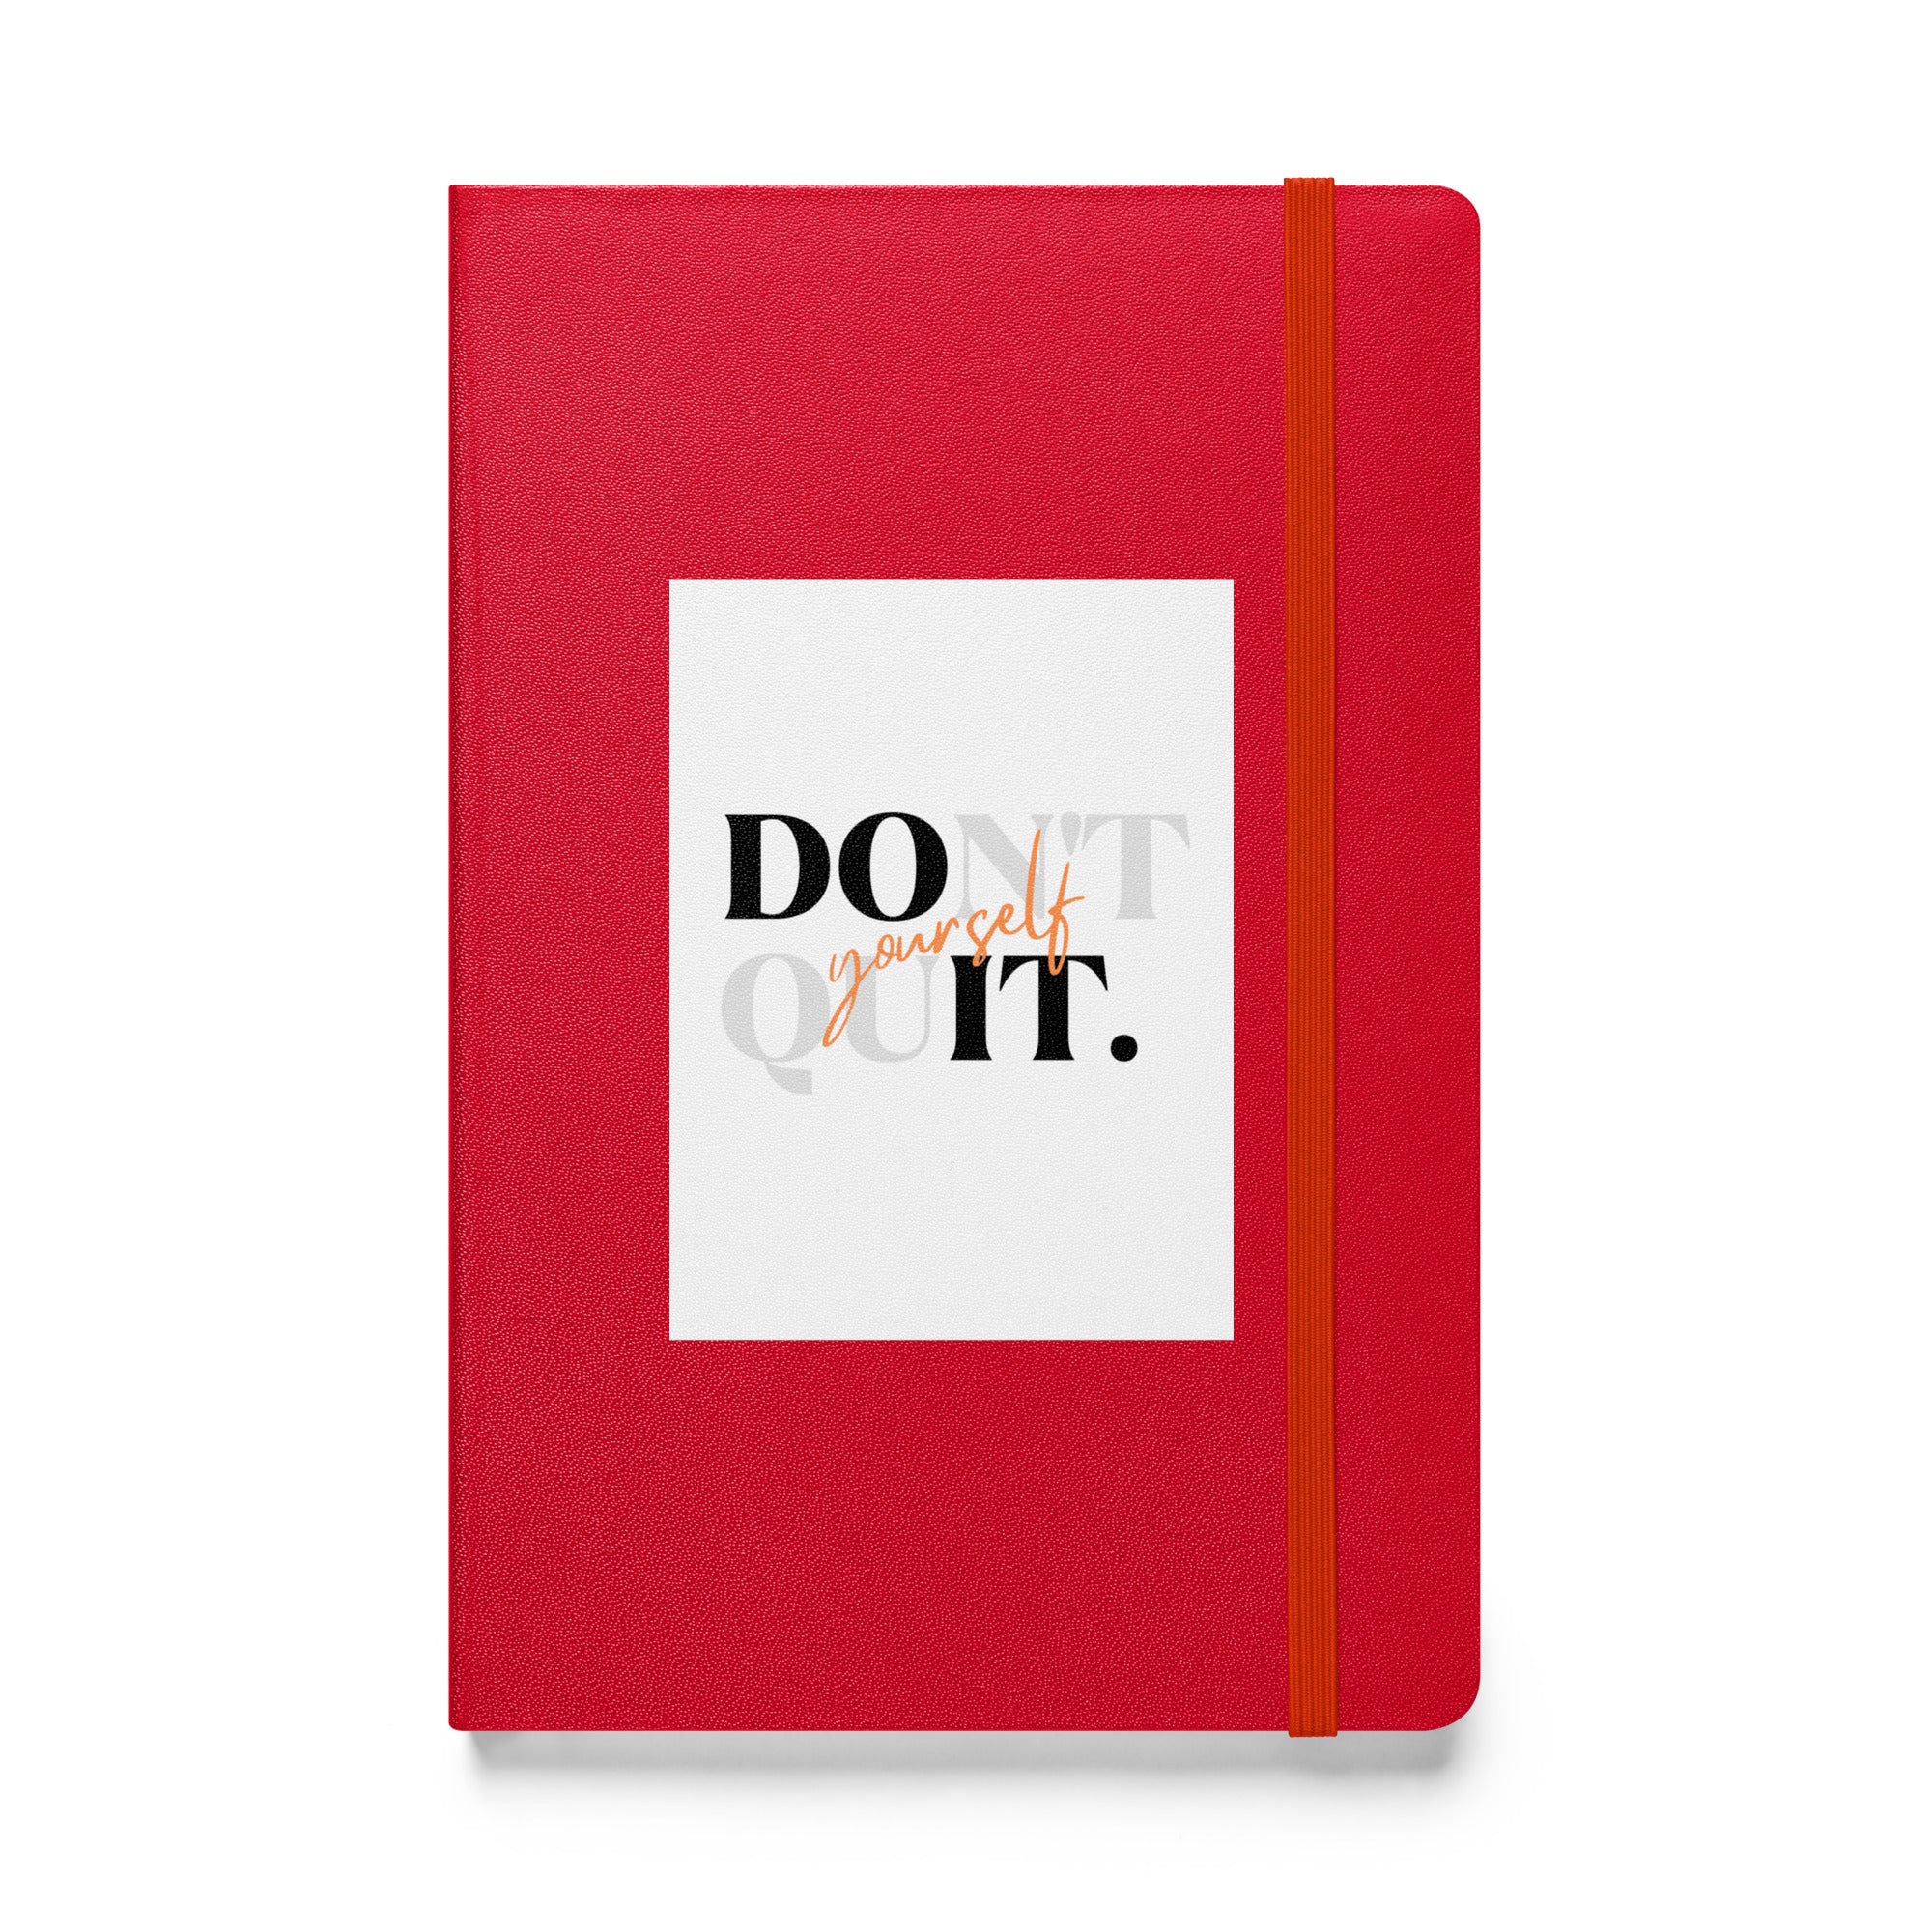 Don't Quit Yourself Hardcover bound notebook